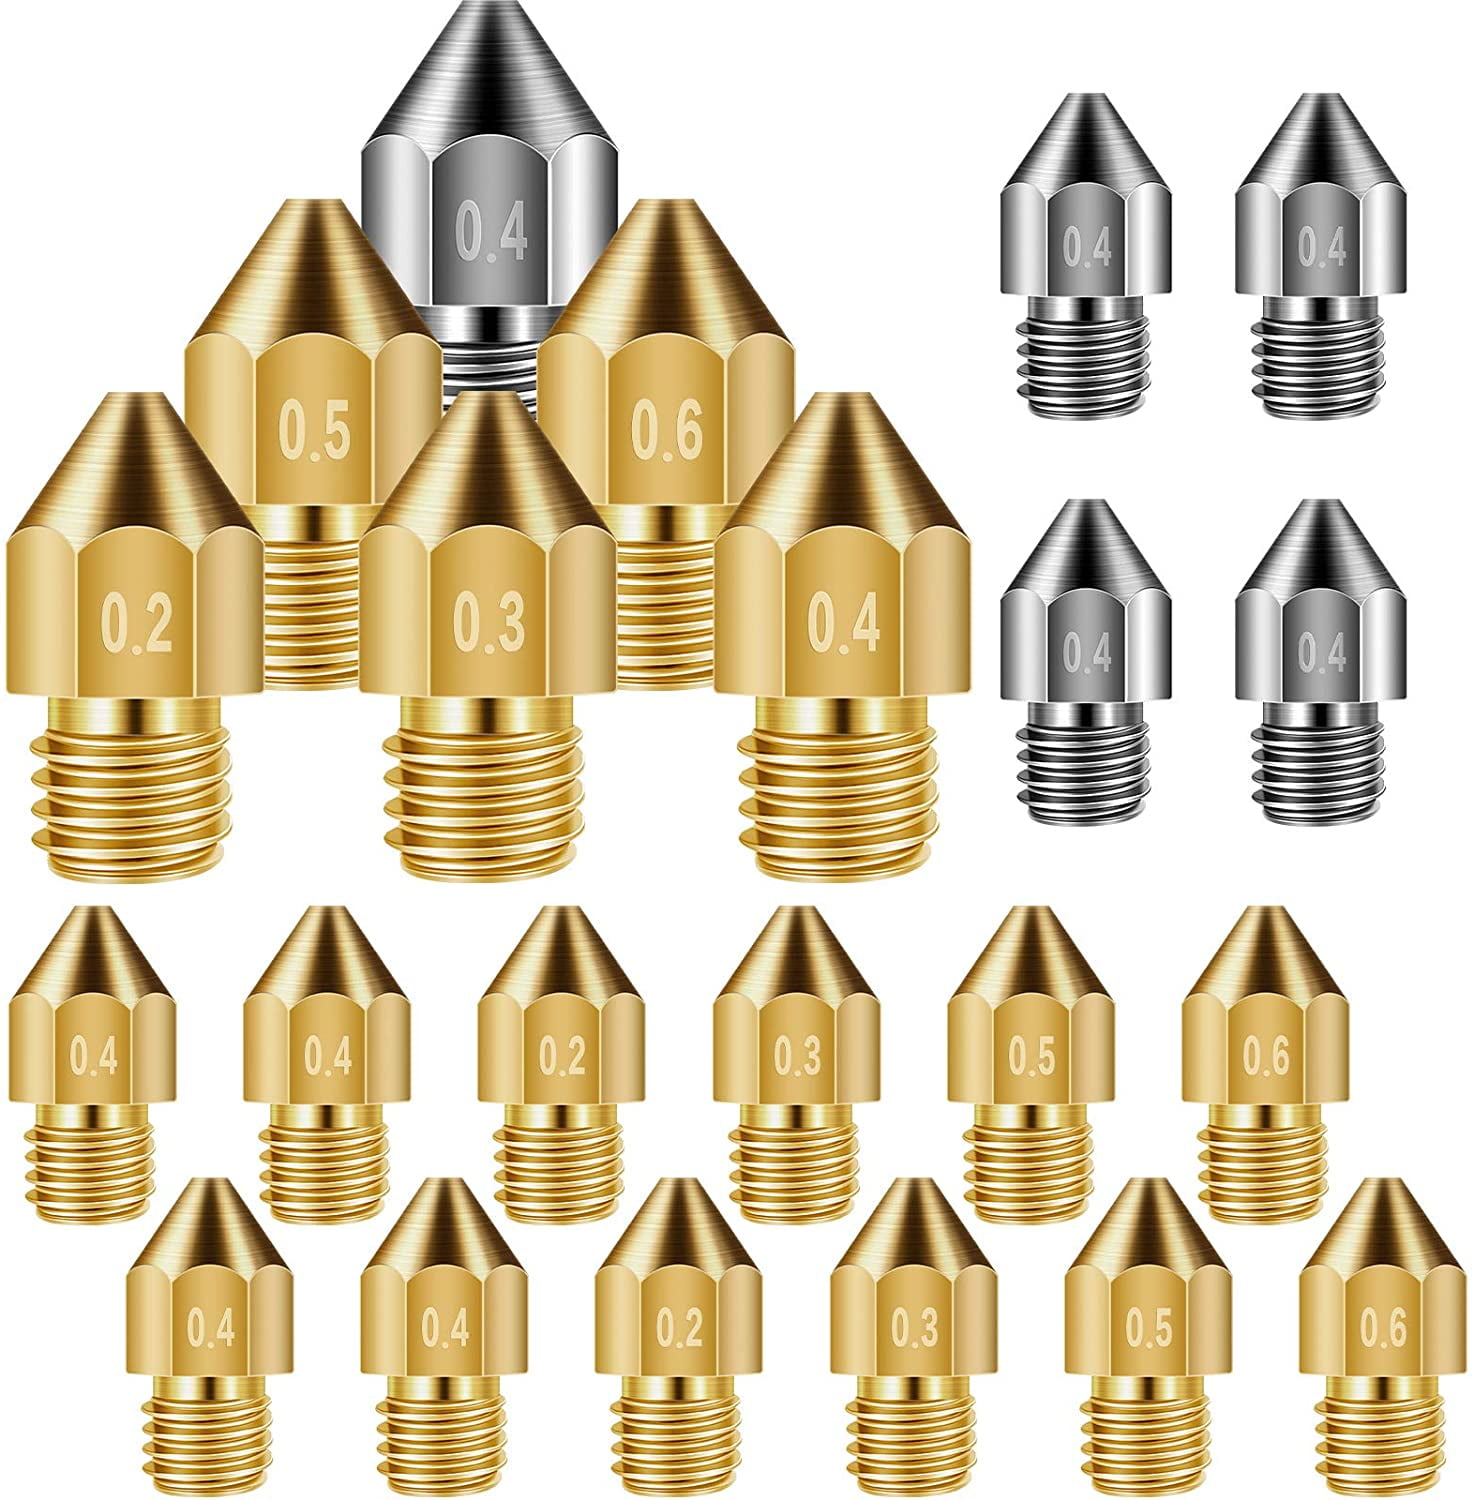 0.5mm 0.3mm 0.2mm 3D Printer Nozzles Brass MK8 Nozzle 0.4mm Extruder Print Head for 1.75mm Printer Makerbot Creality CR-10 16 Pieces